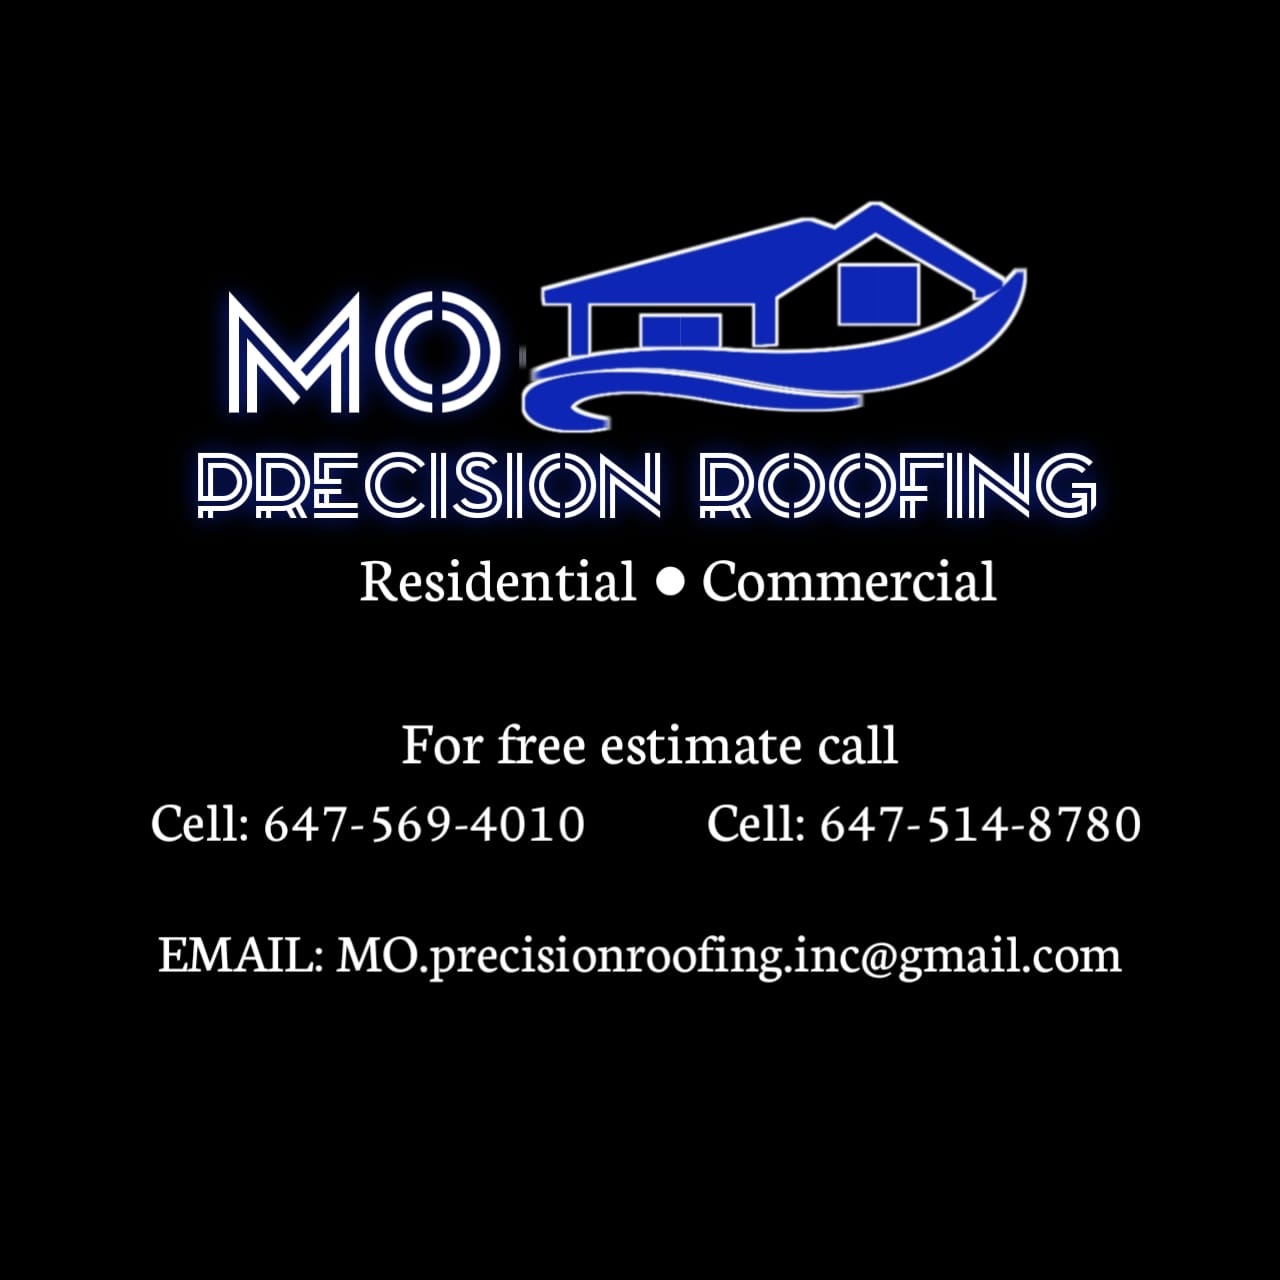 Mo Precision Roofing's logo